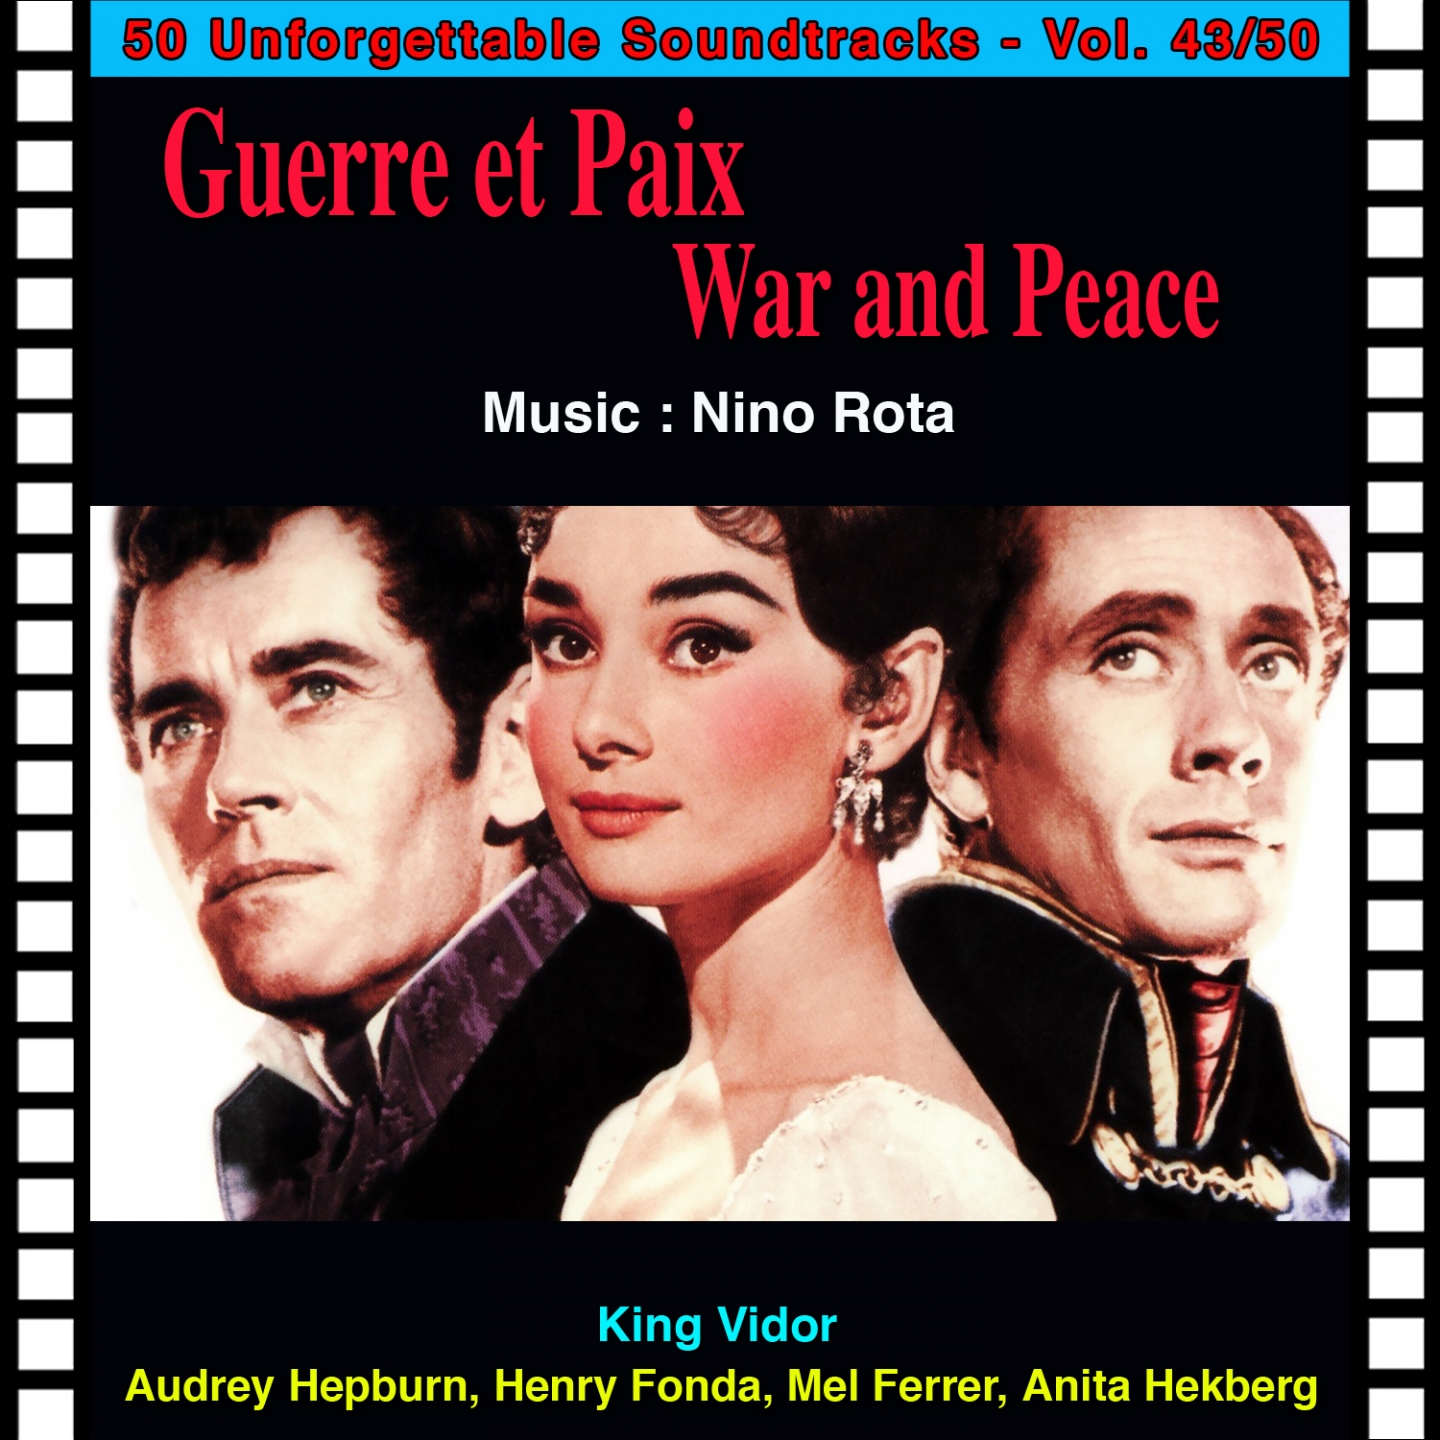 The Homecoming at Moscow (Guerre Et Paix - War and Peace)